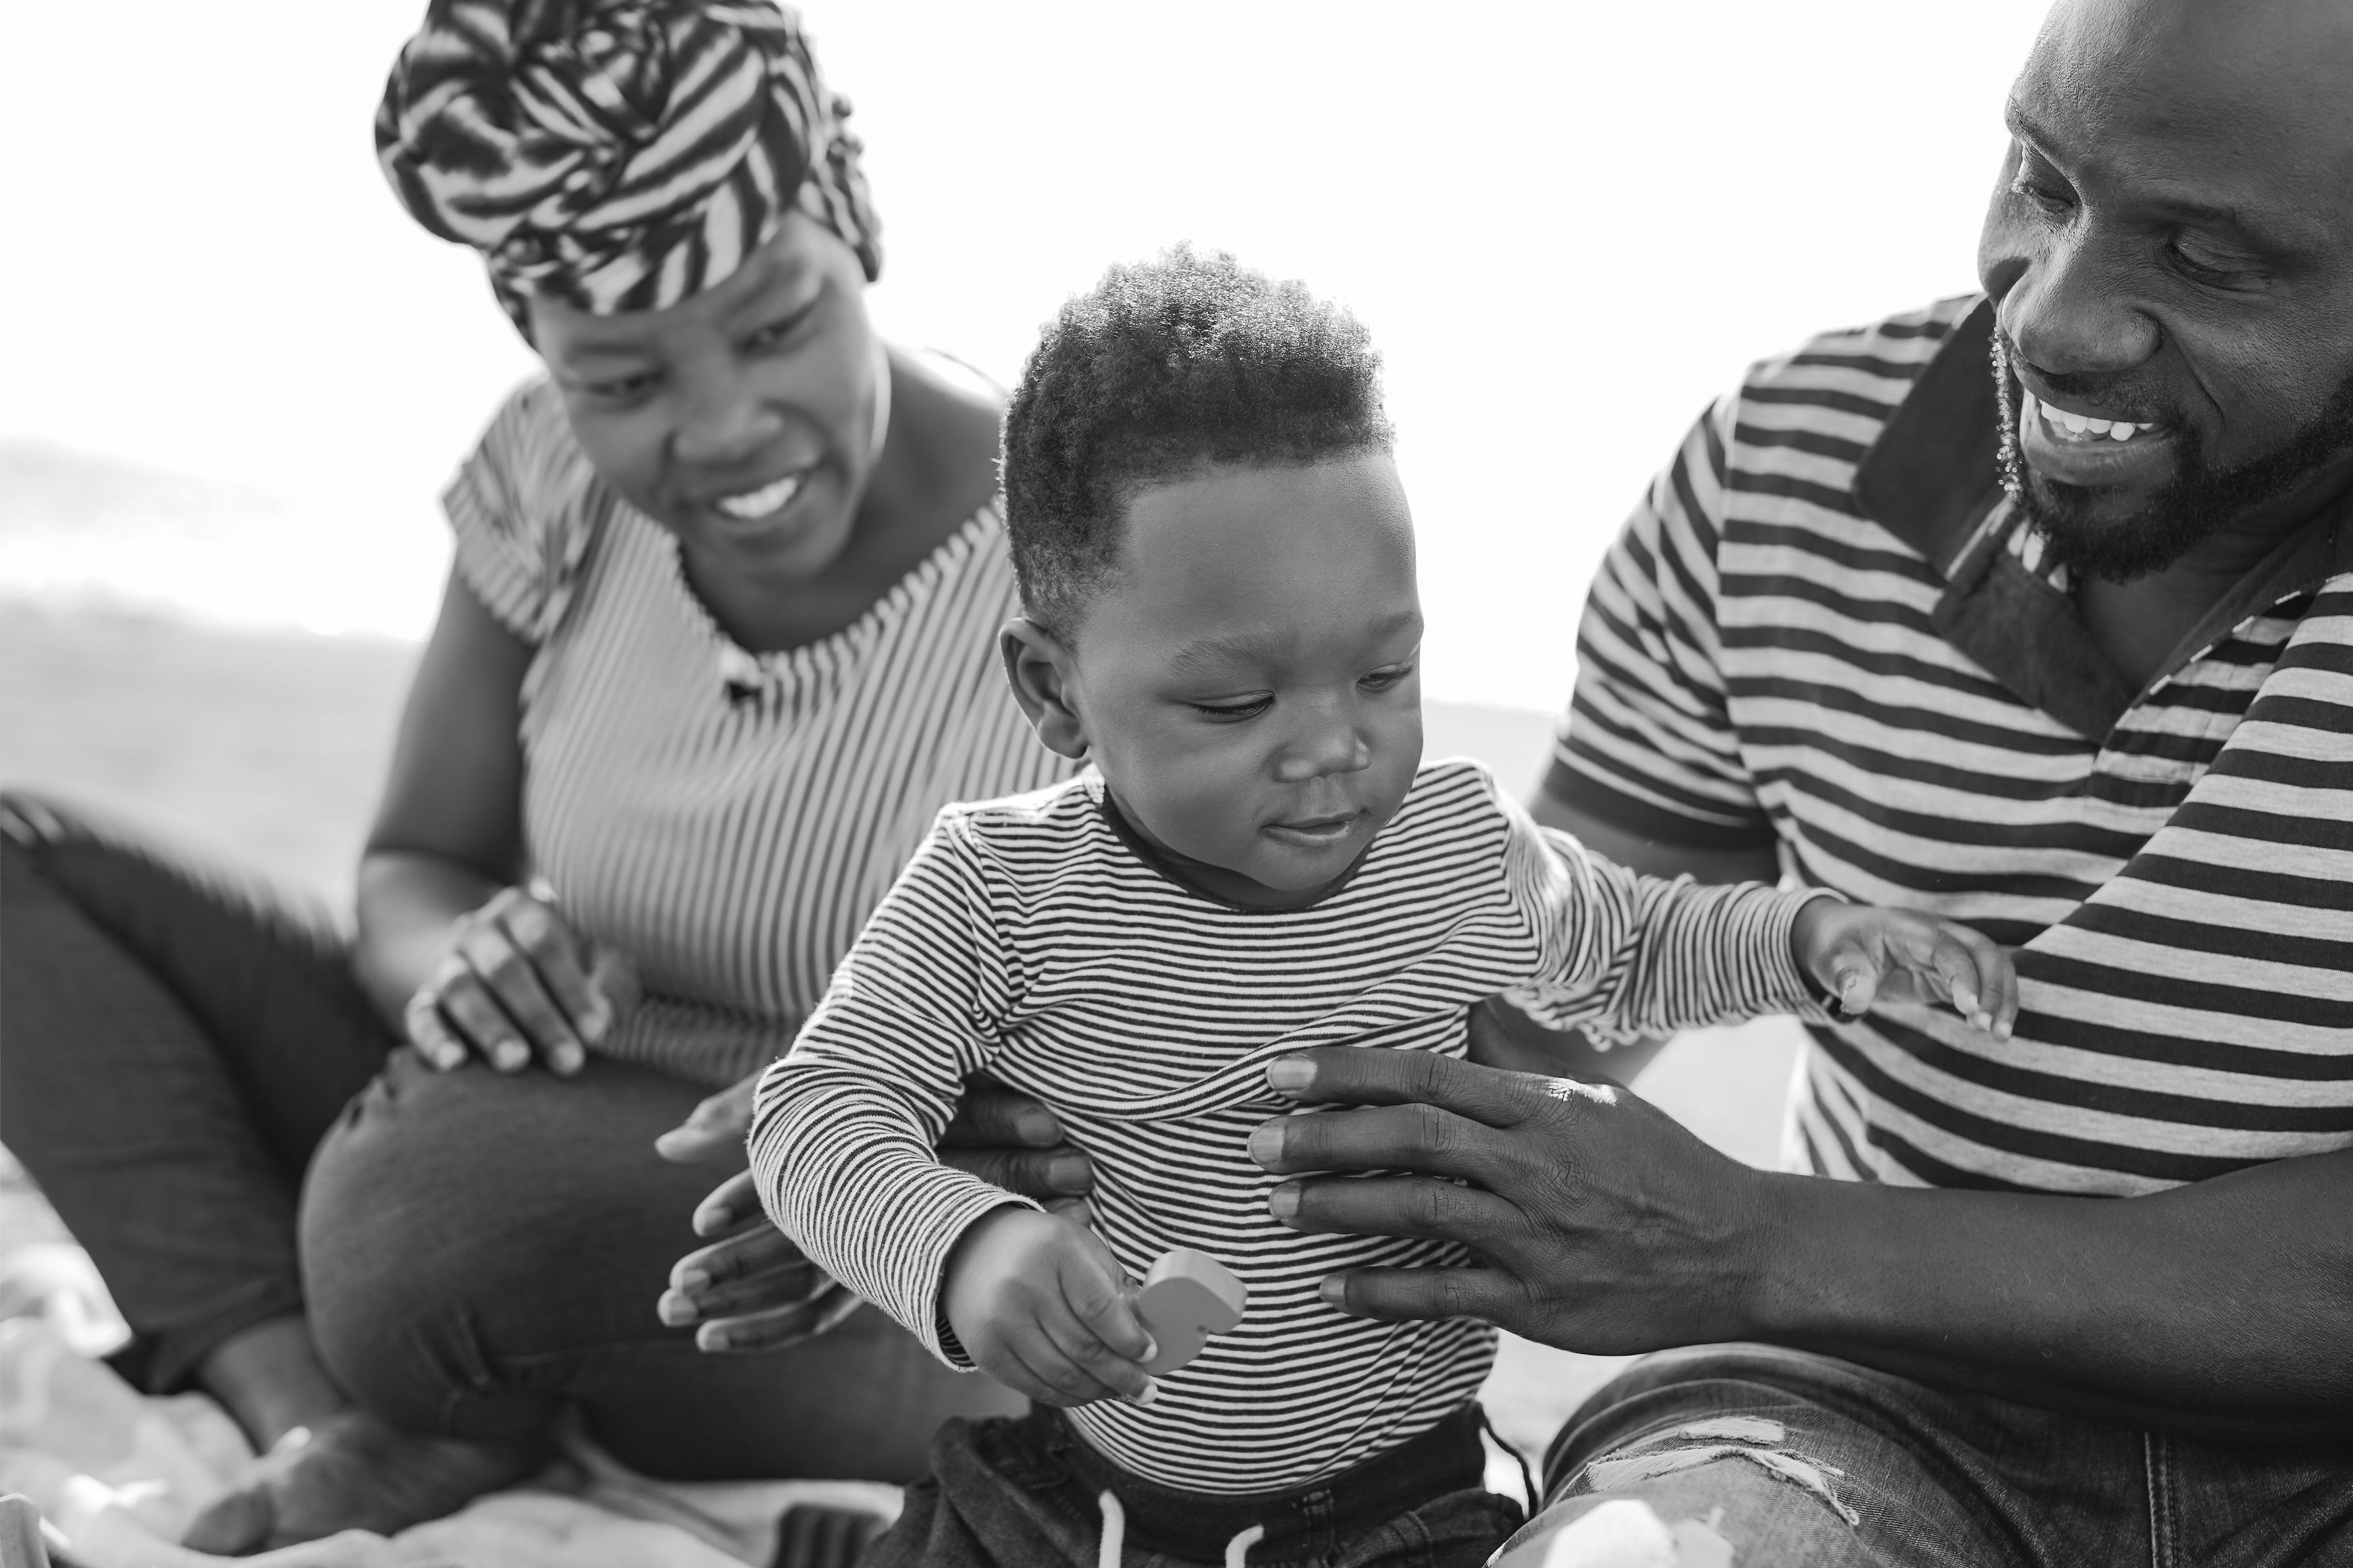 Two parents are laughing holding their smiling toddler. The image is in black and white.